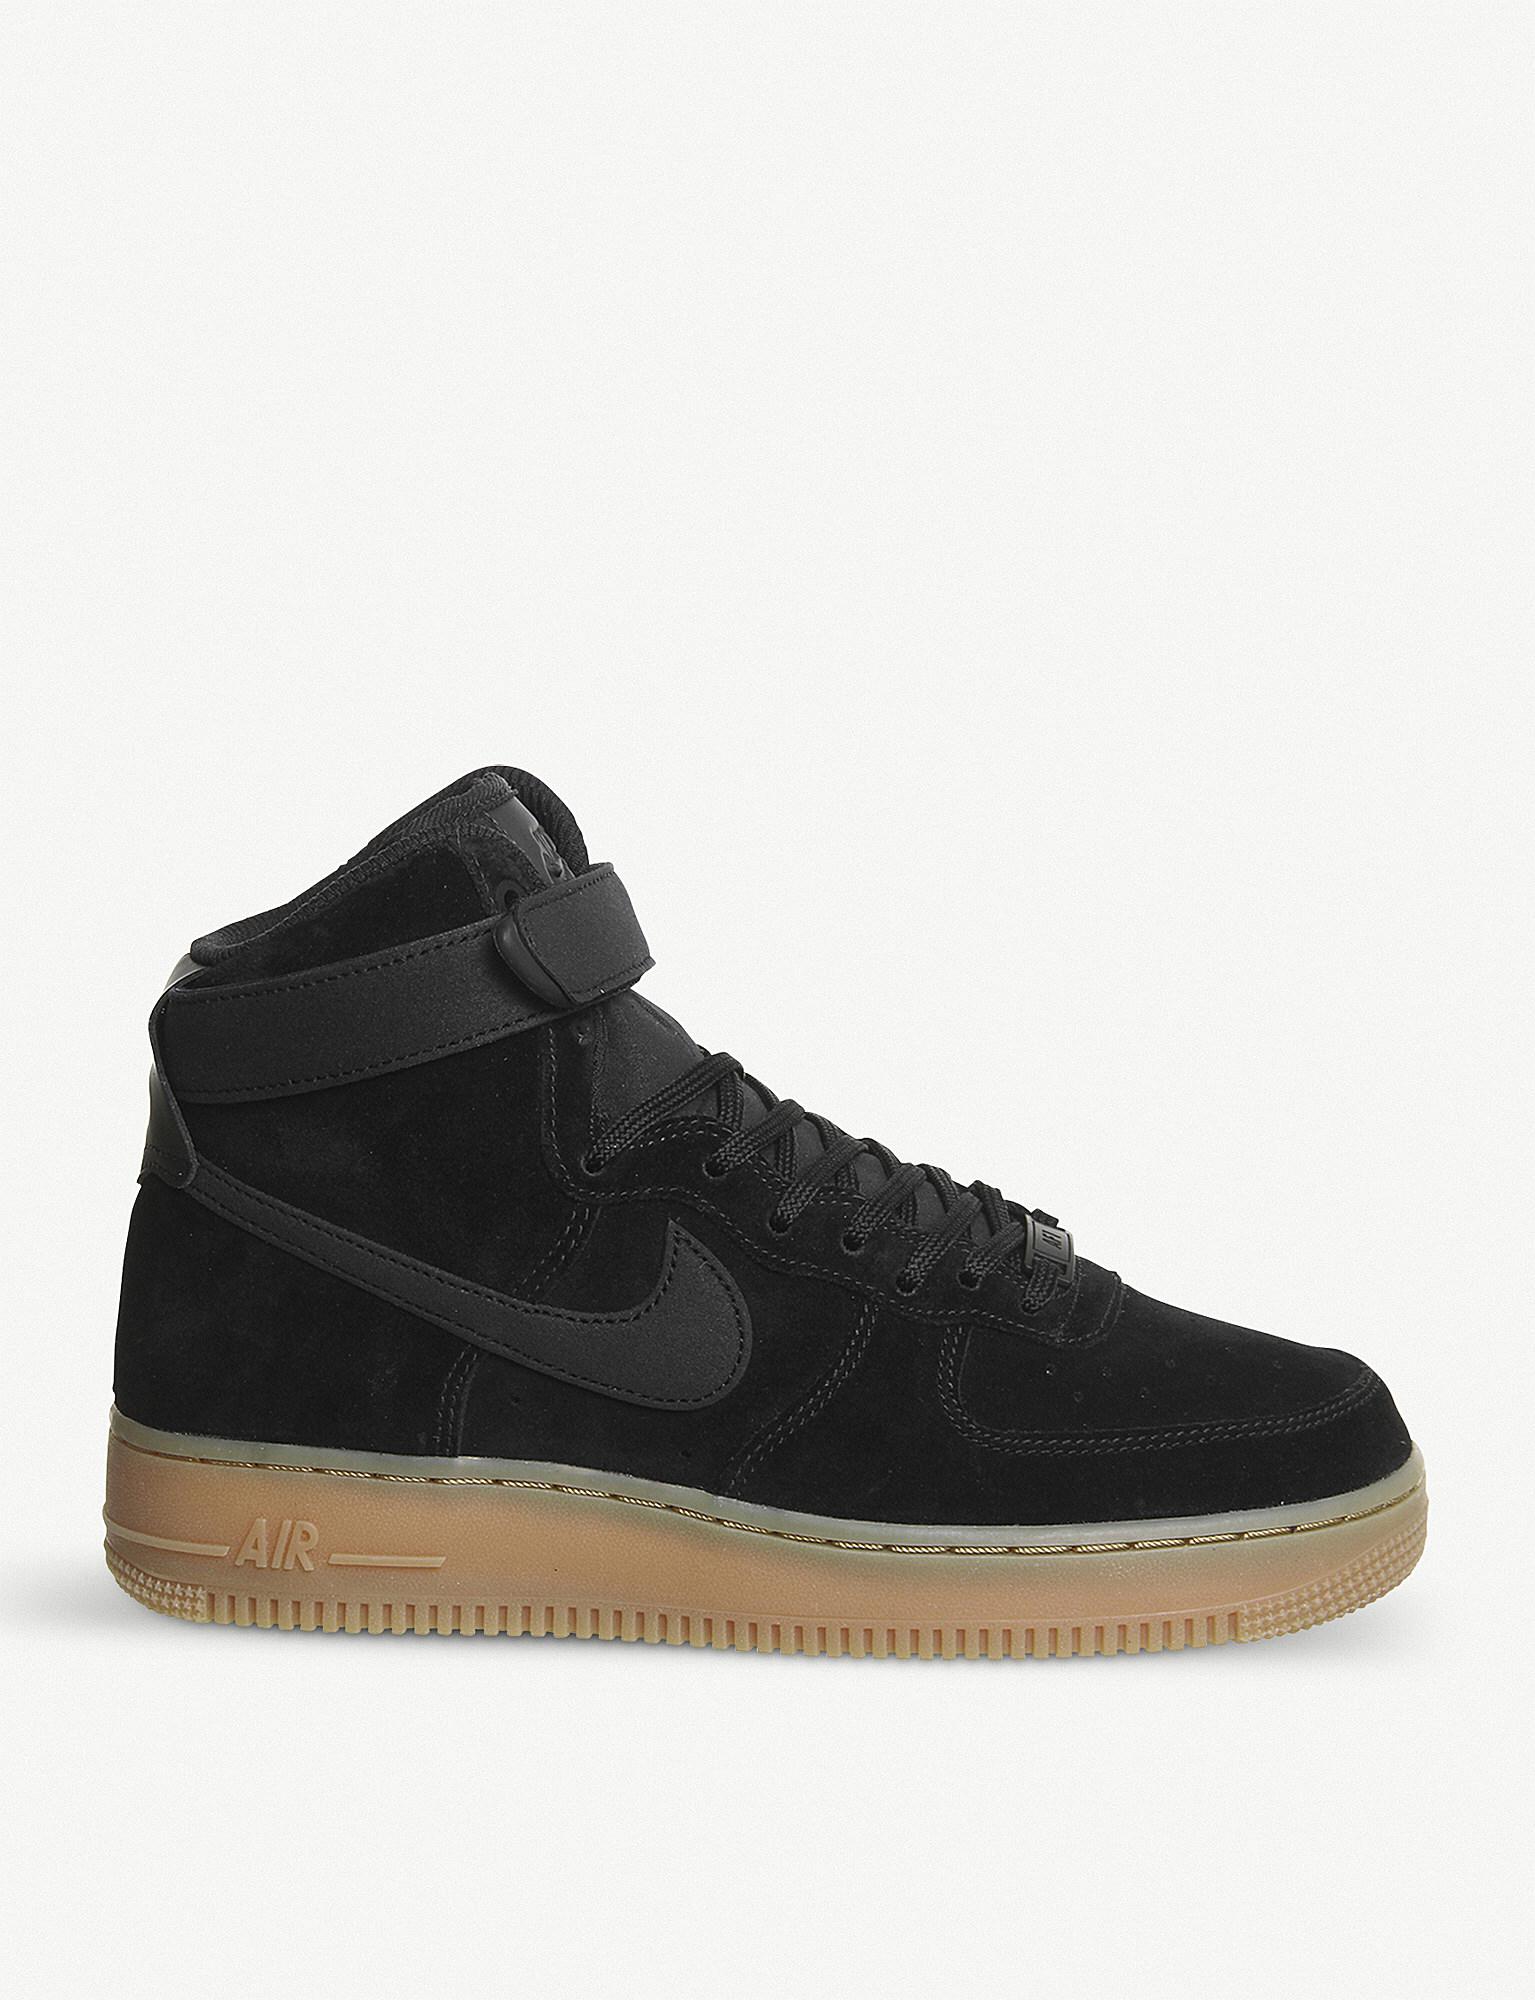 Nike Air Force 1 Suede High-top Trainers in Black for Men - Lyst